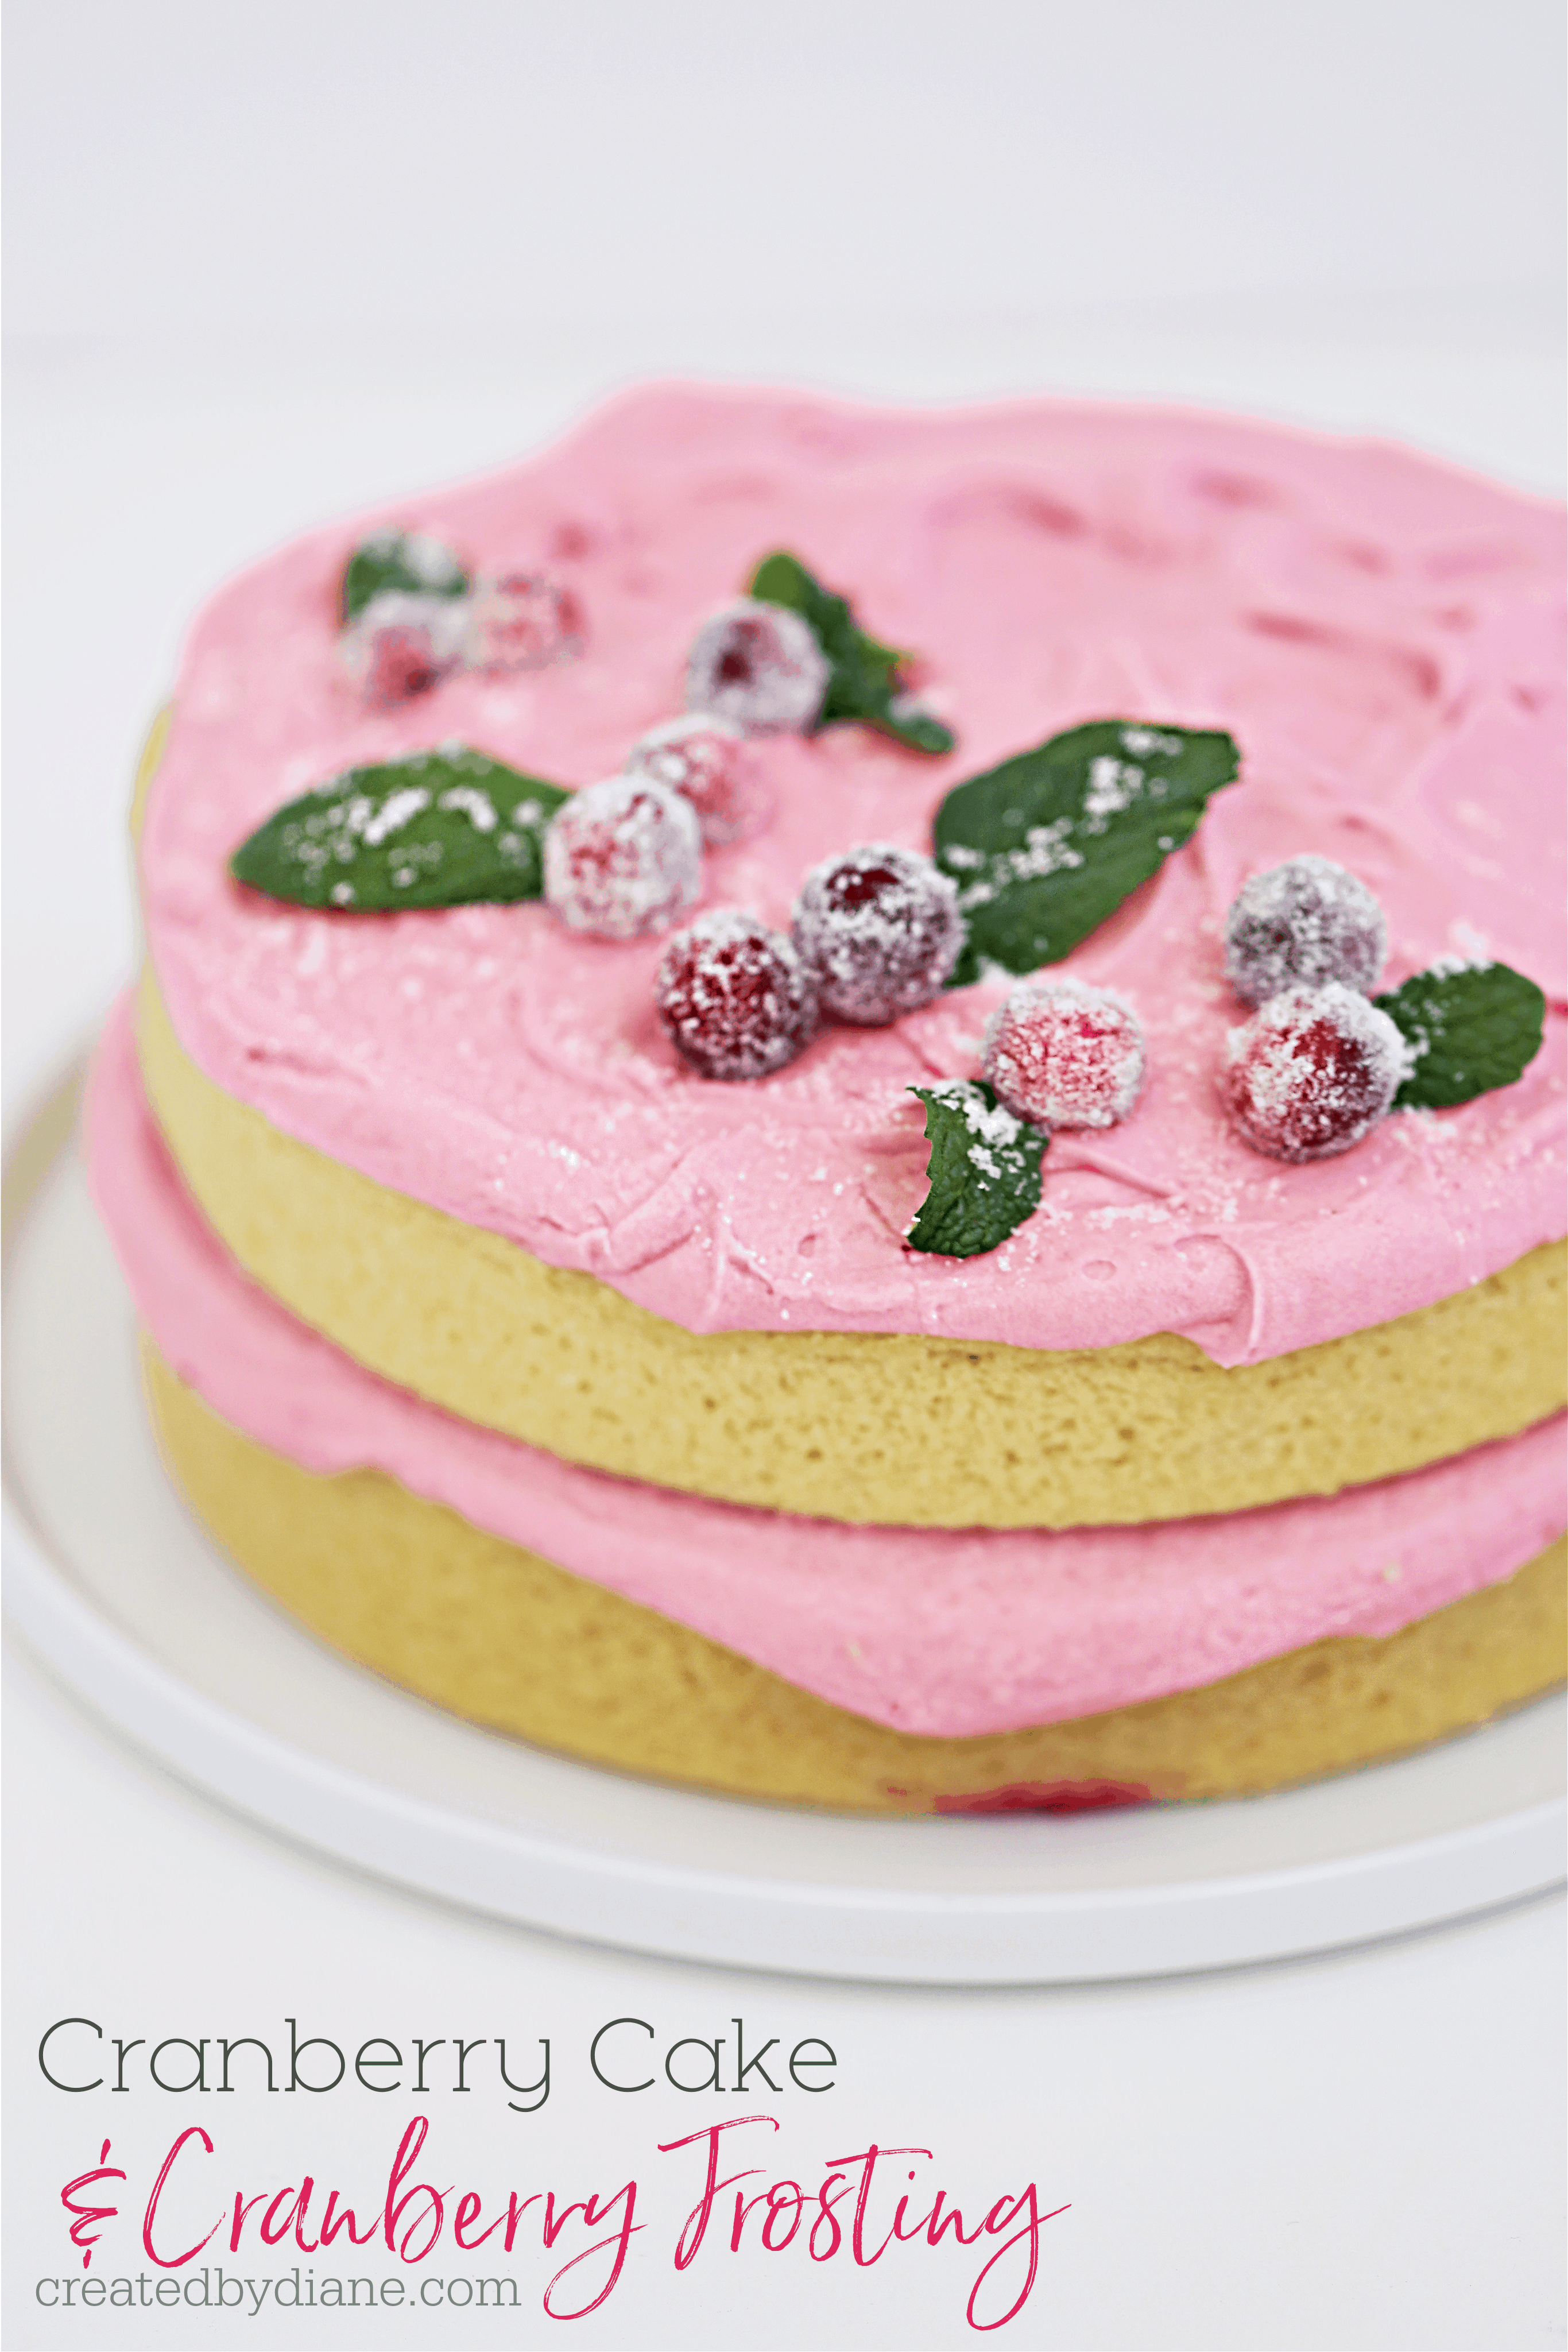 Cranberry Cake with Cranberry Frosting